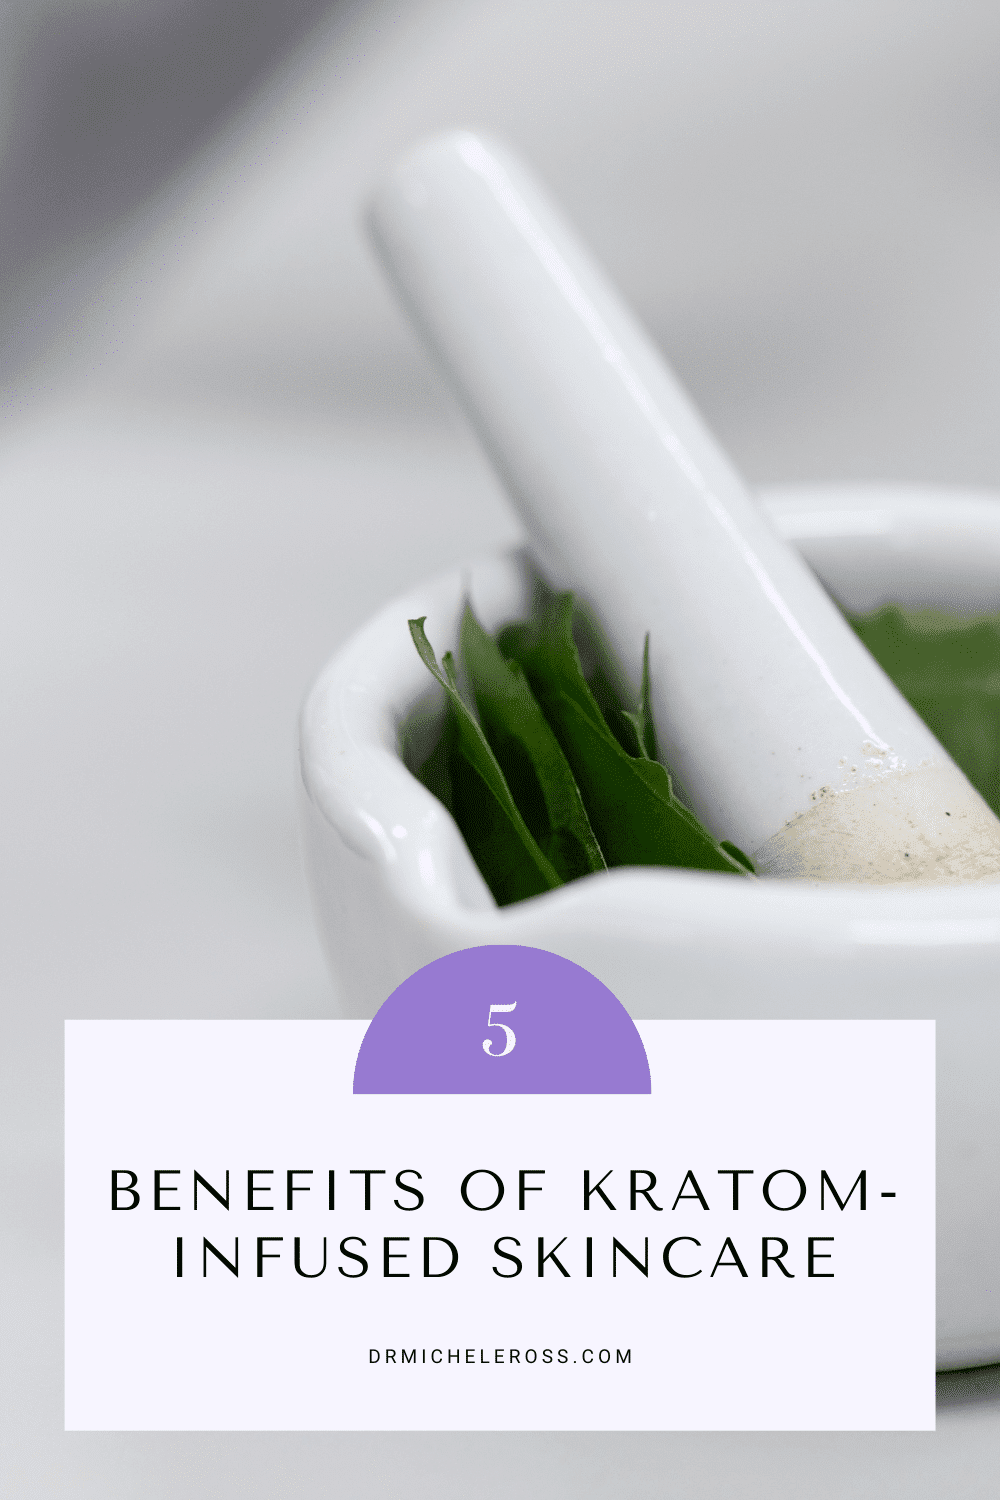 mortar and pestle with kratom leaves in it for facemask skincare